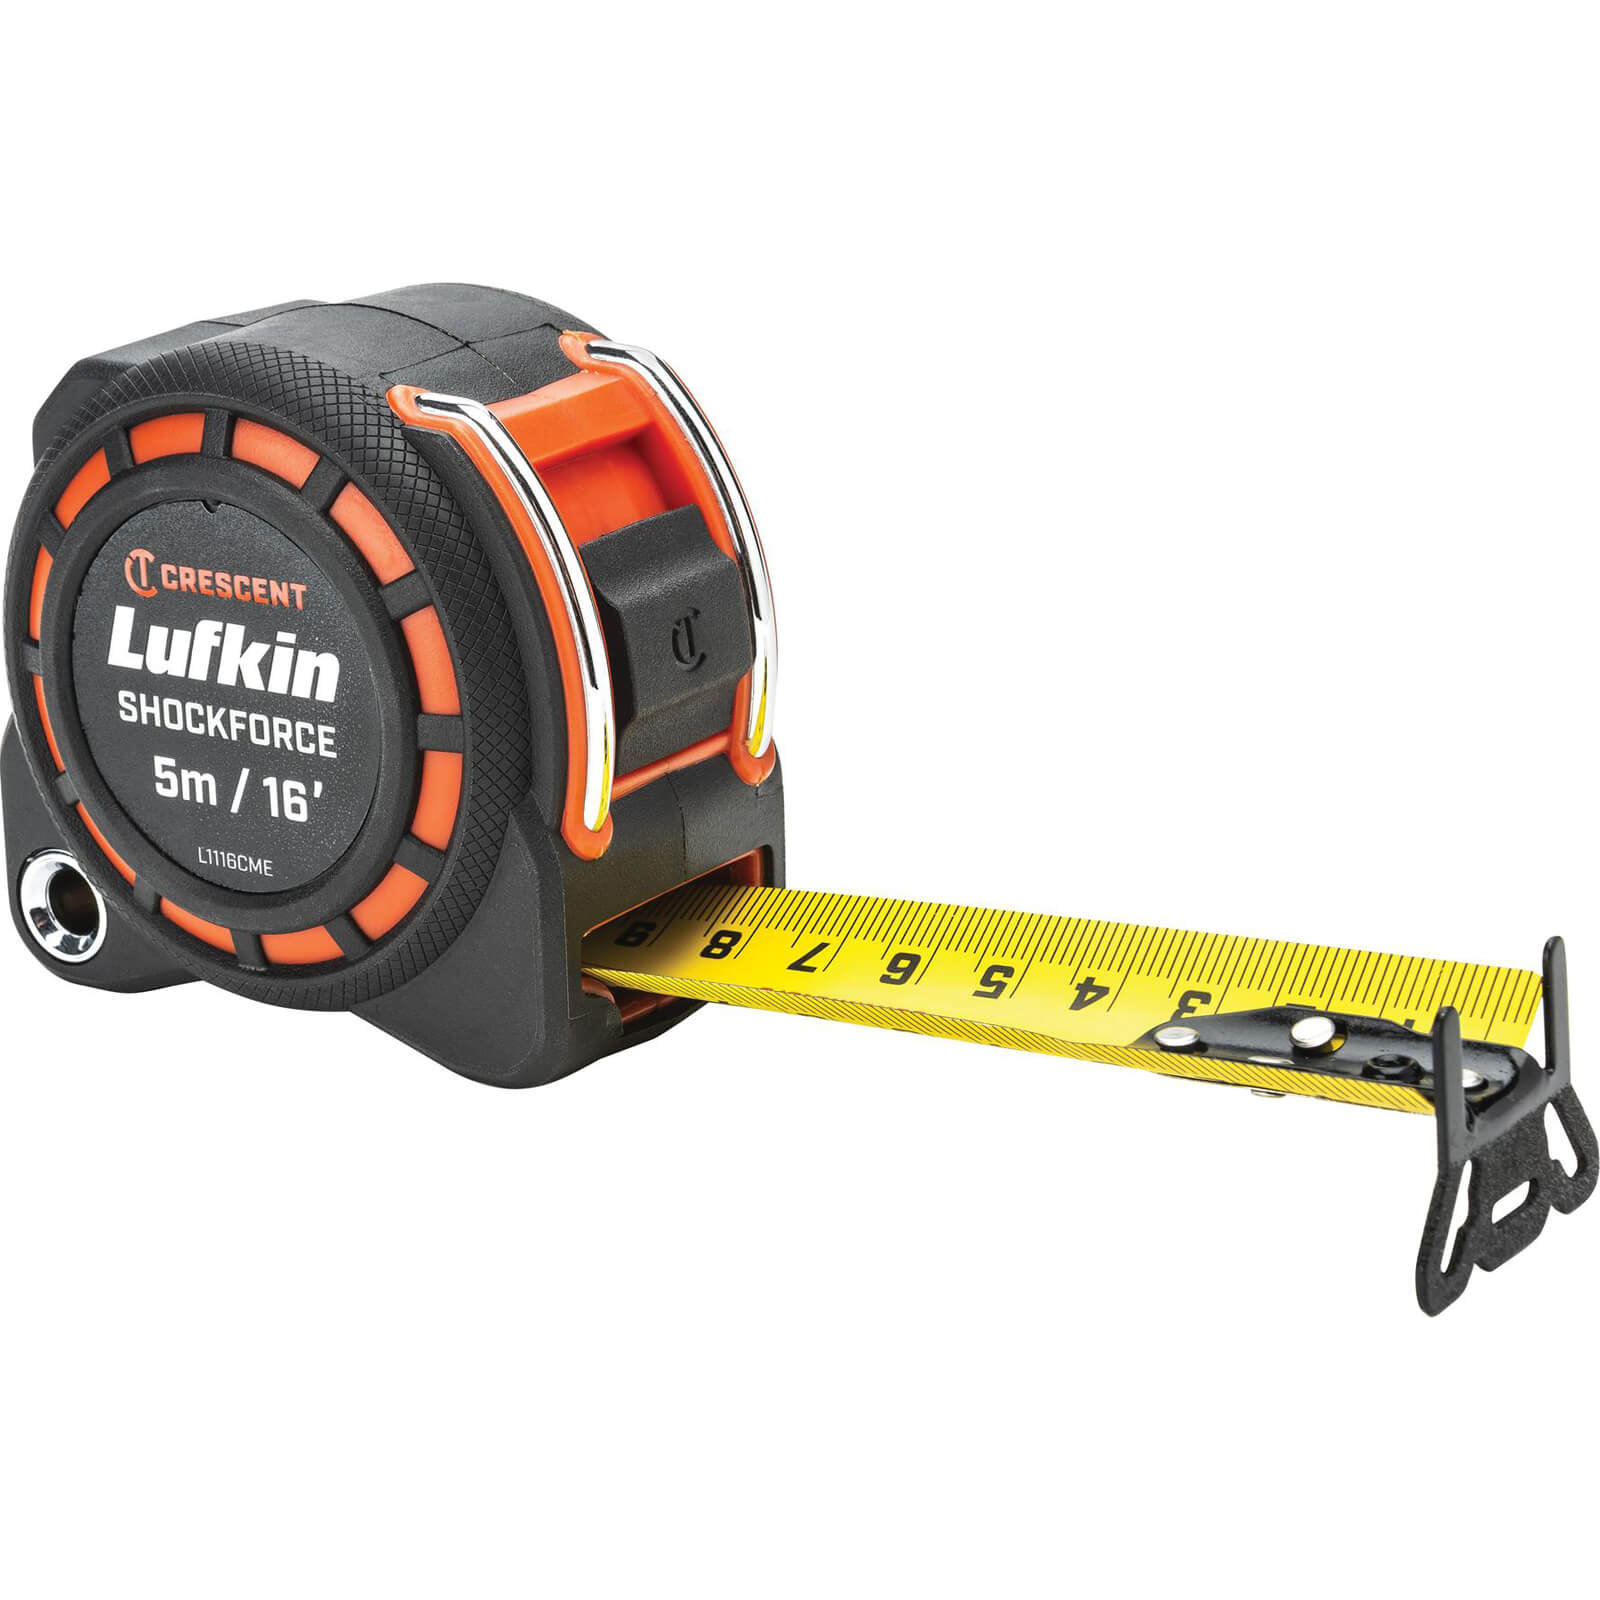 Crescent Lufkin Shockforce Dual Sided Tape Measure Imperial & Metric 16ft / 5m 30mm